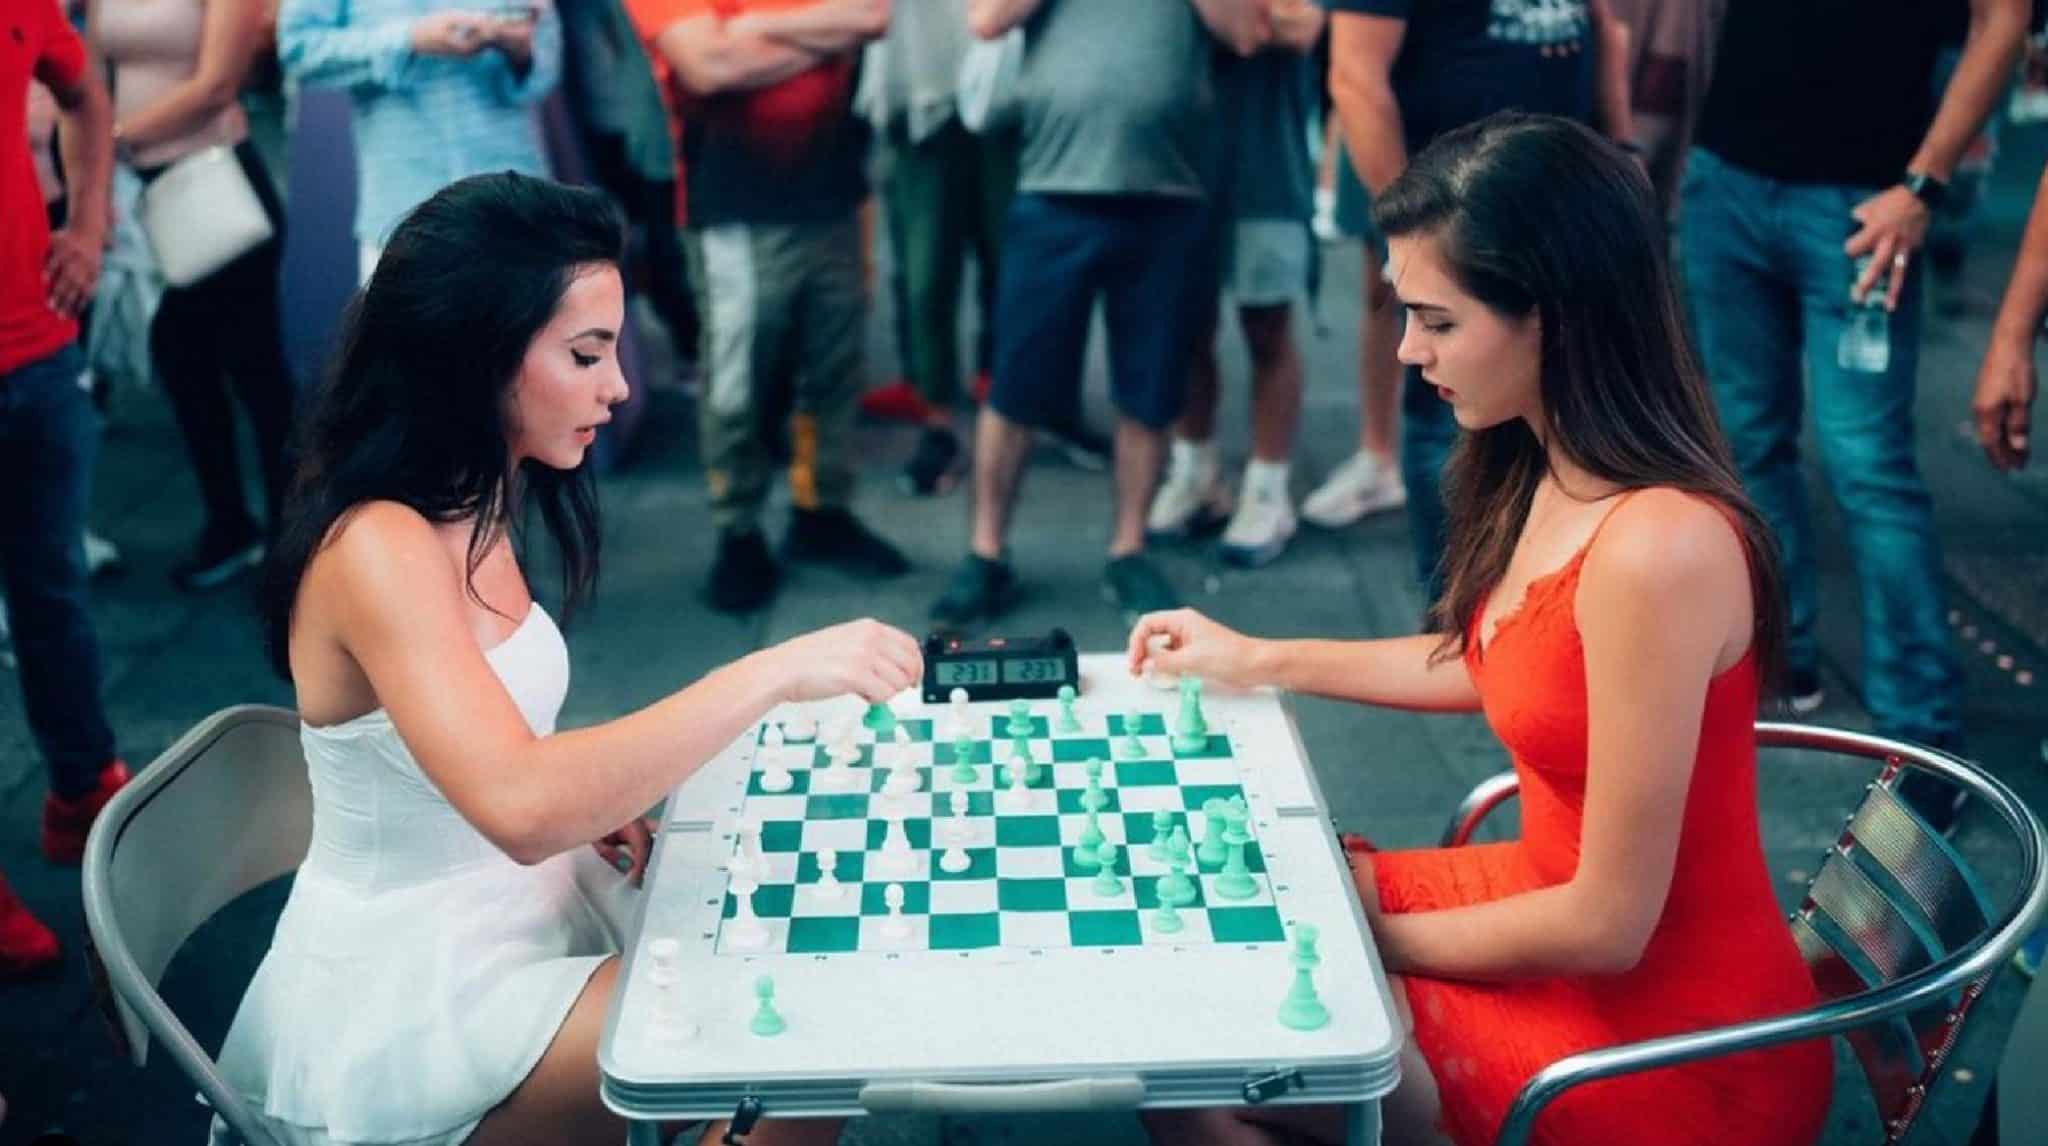 Andrea Botez stunned after 9-year-old kid checkmates her on Twitch chess  tour - Dexerto